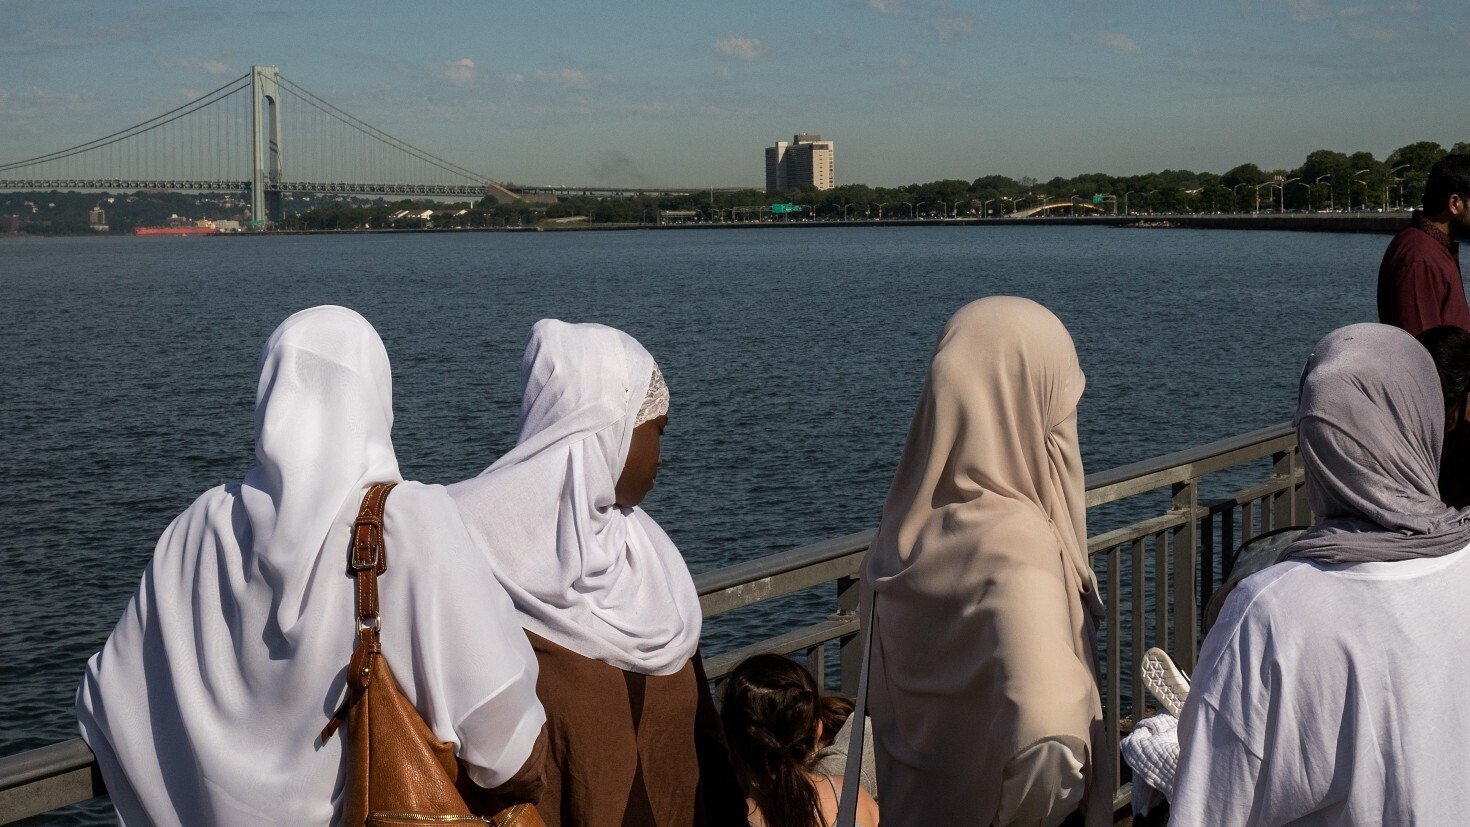 Muslim women leave after morning prayer to start their Eid al-Adha celebrations at Bush Terminal Piers Park in Brooklyn, New York, on 9 July 2022 (AFP)